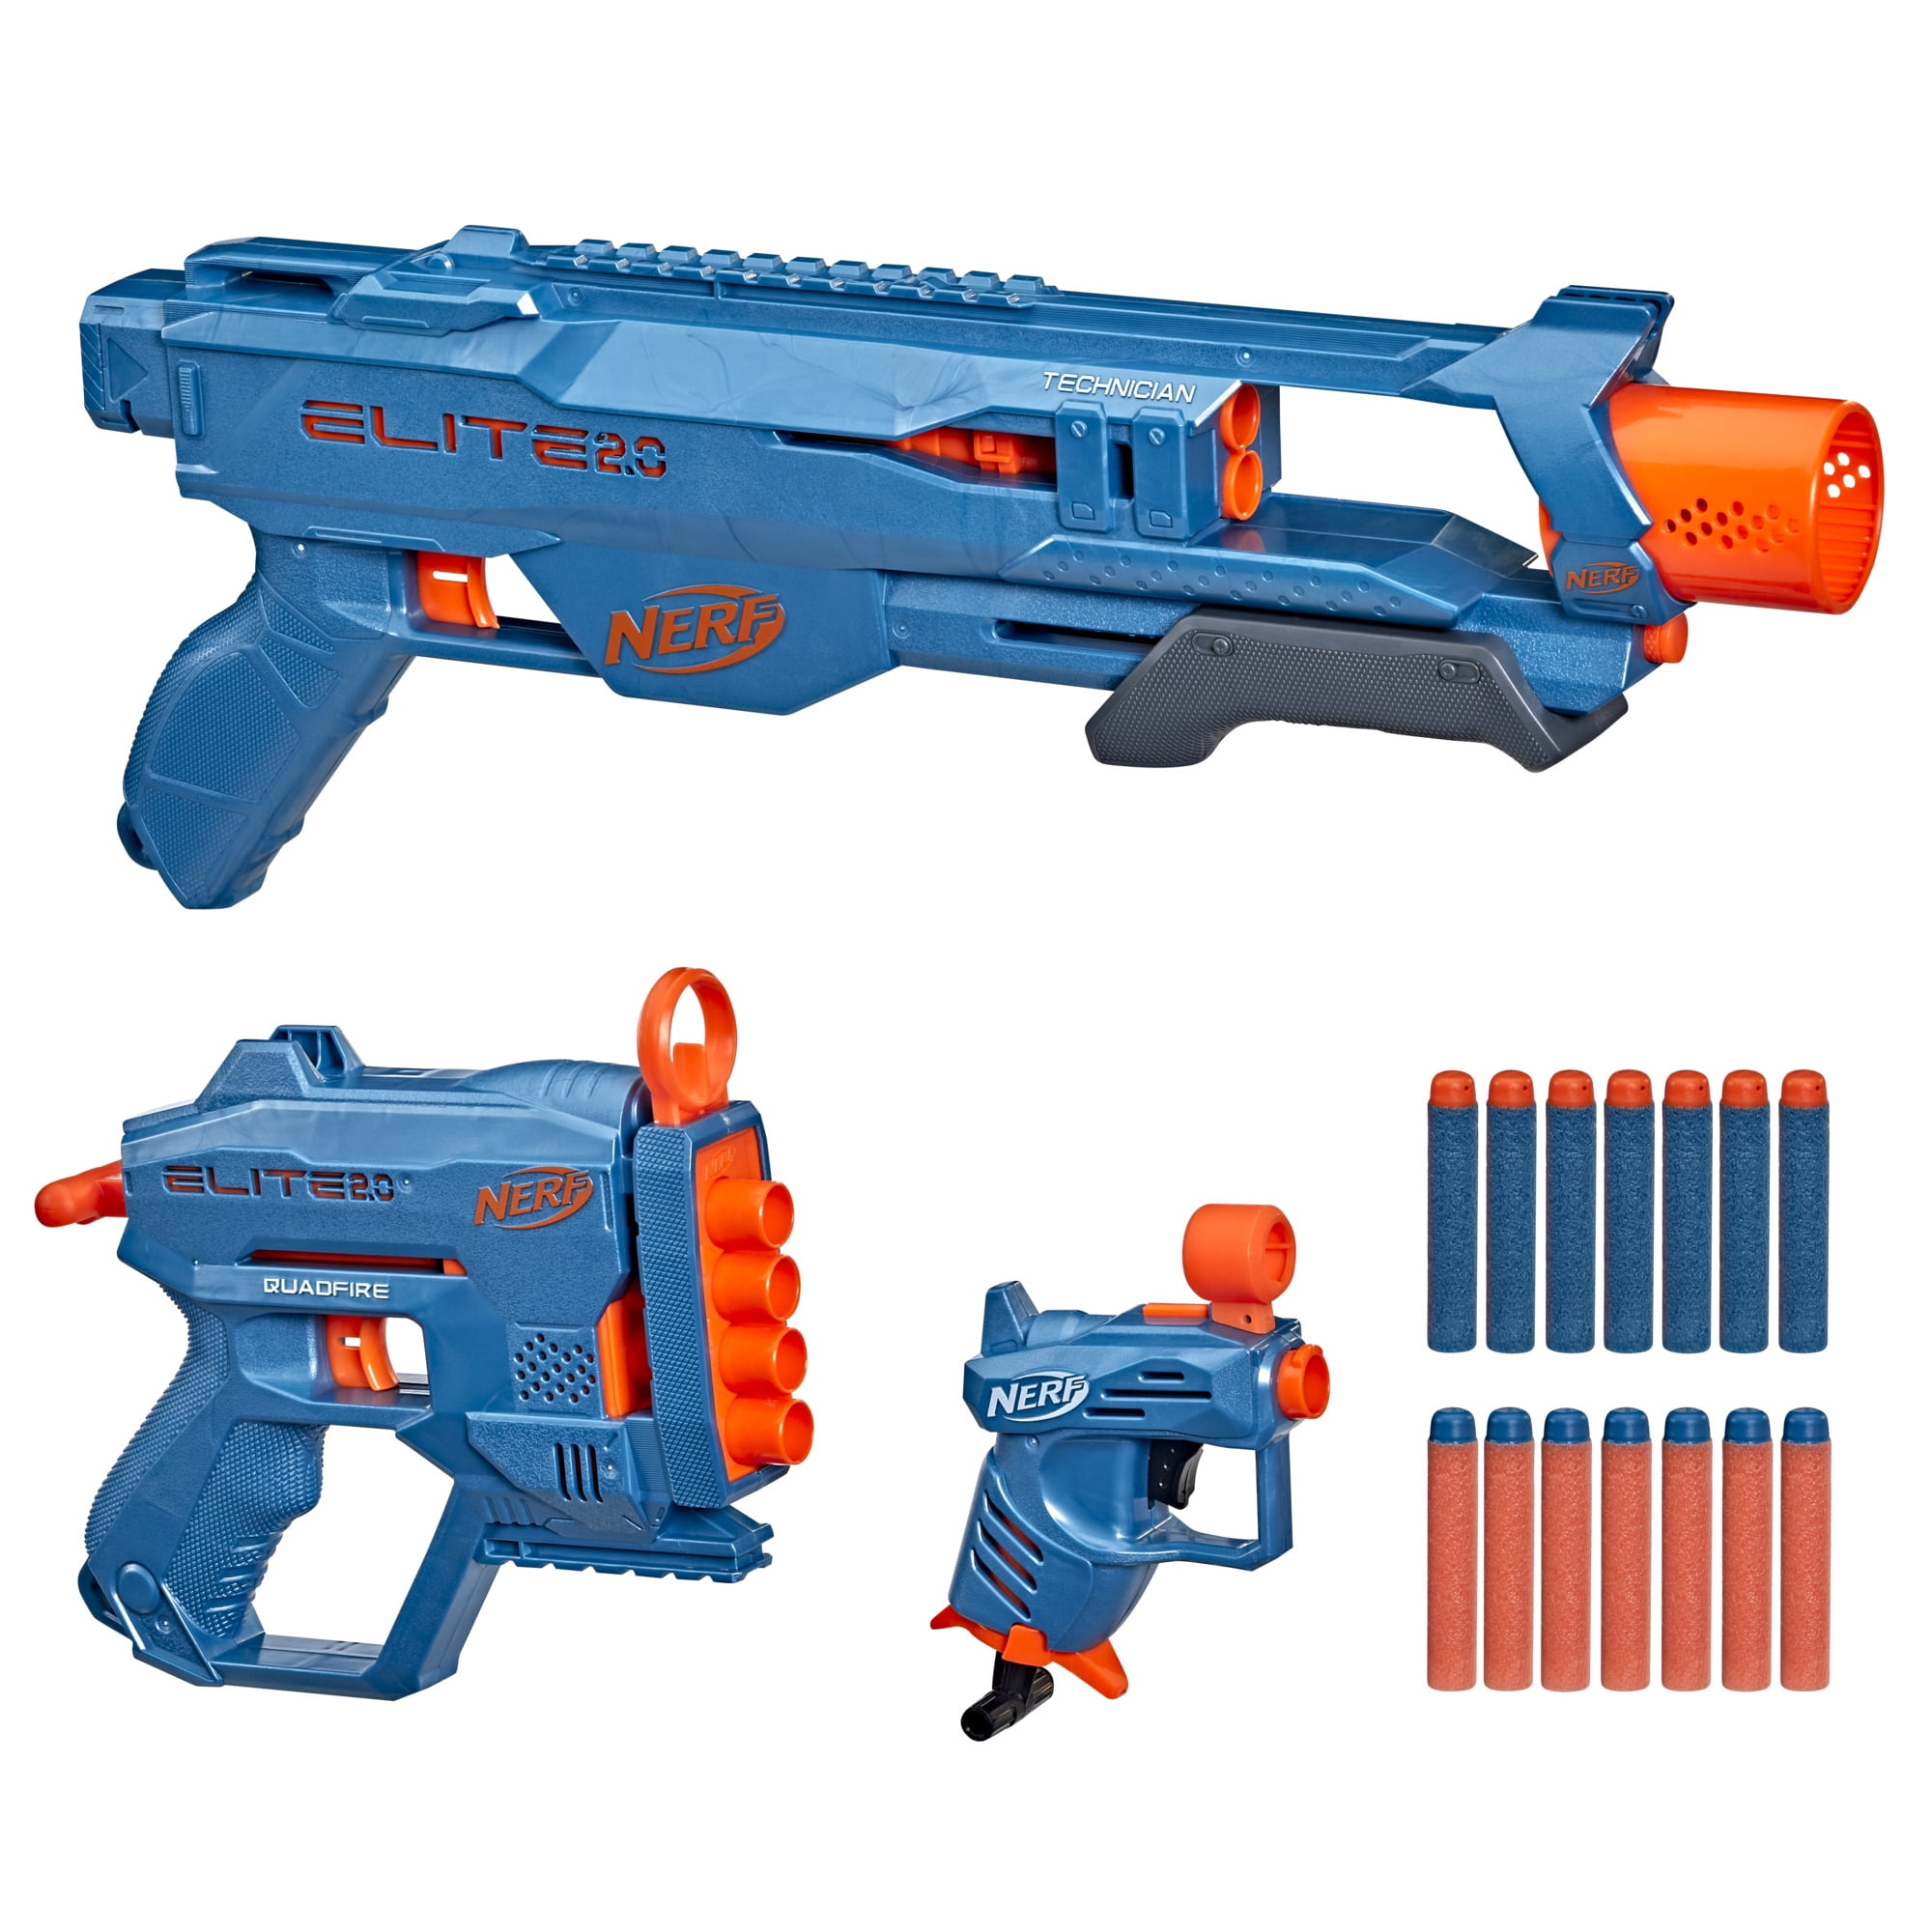 Nerf Elite 2.0 Commander Hand Cannon Boy's Toy Guns Includes 12 Darts Kid's Gift 